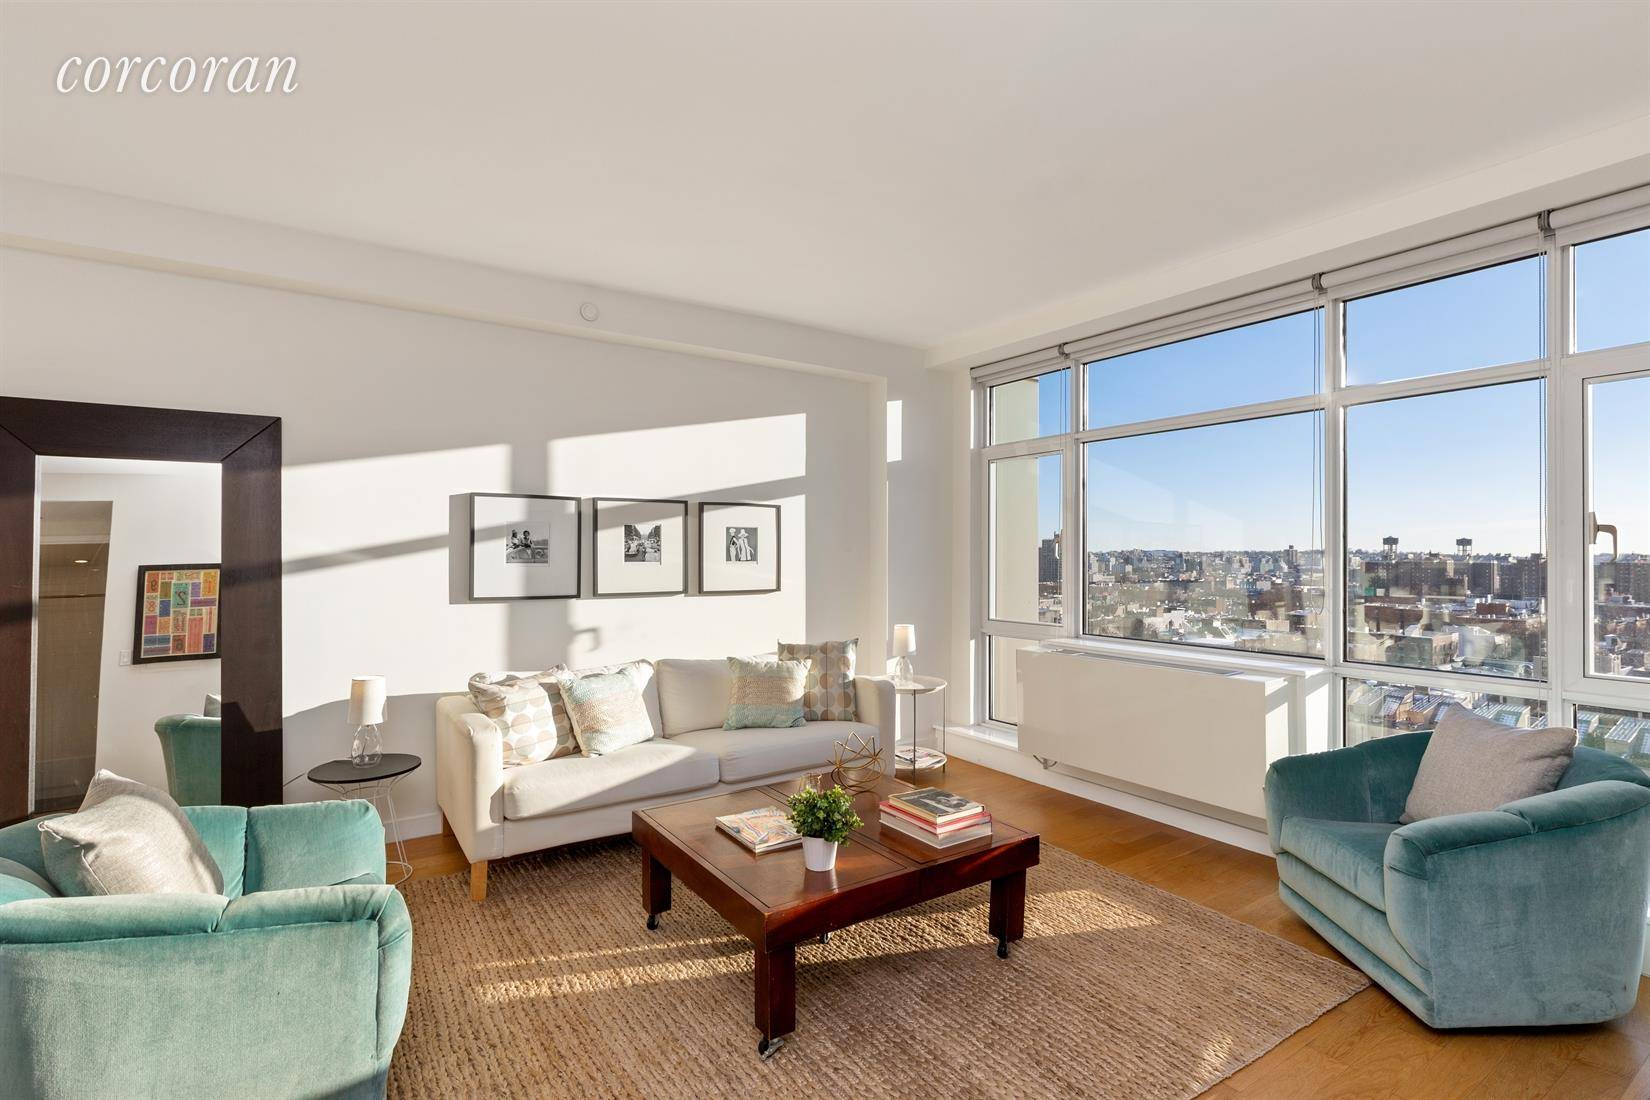 VIEWS FOR MILES is absolutely not an exaggeration when looking out the wall of windows in this extra large, meticulously maintained one bedroom condo in the heart of Downtown Brooklyn.